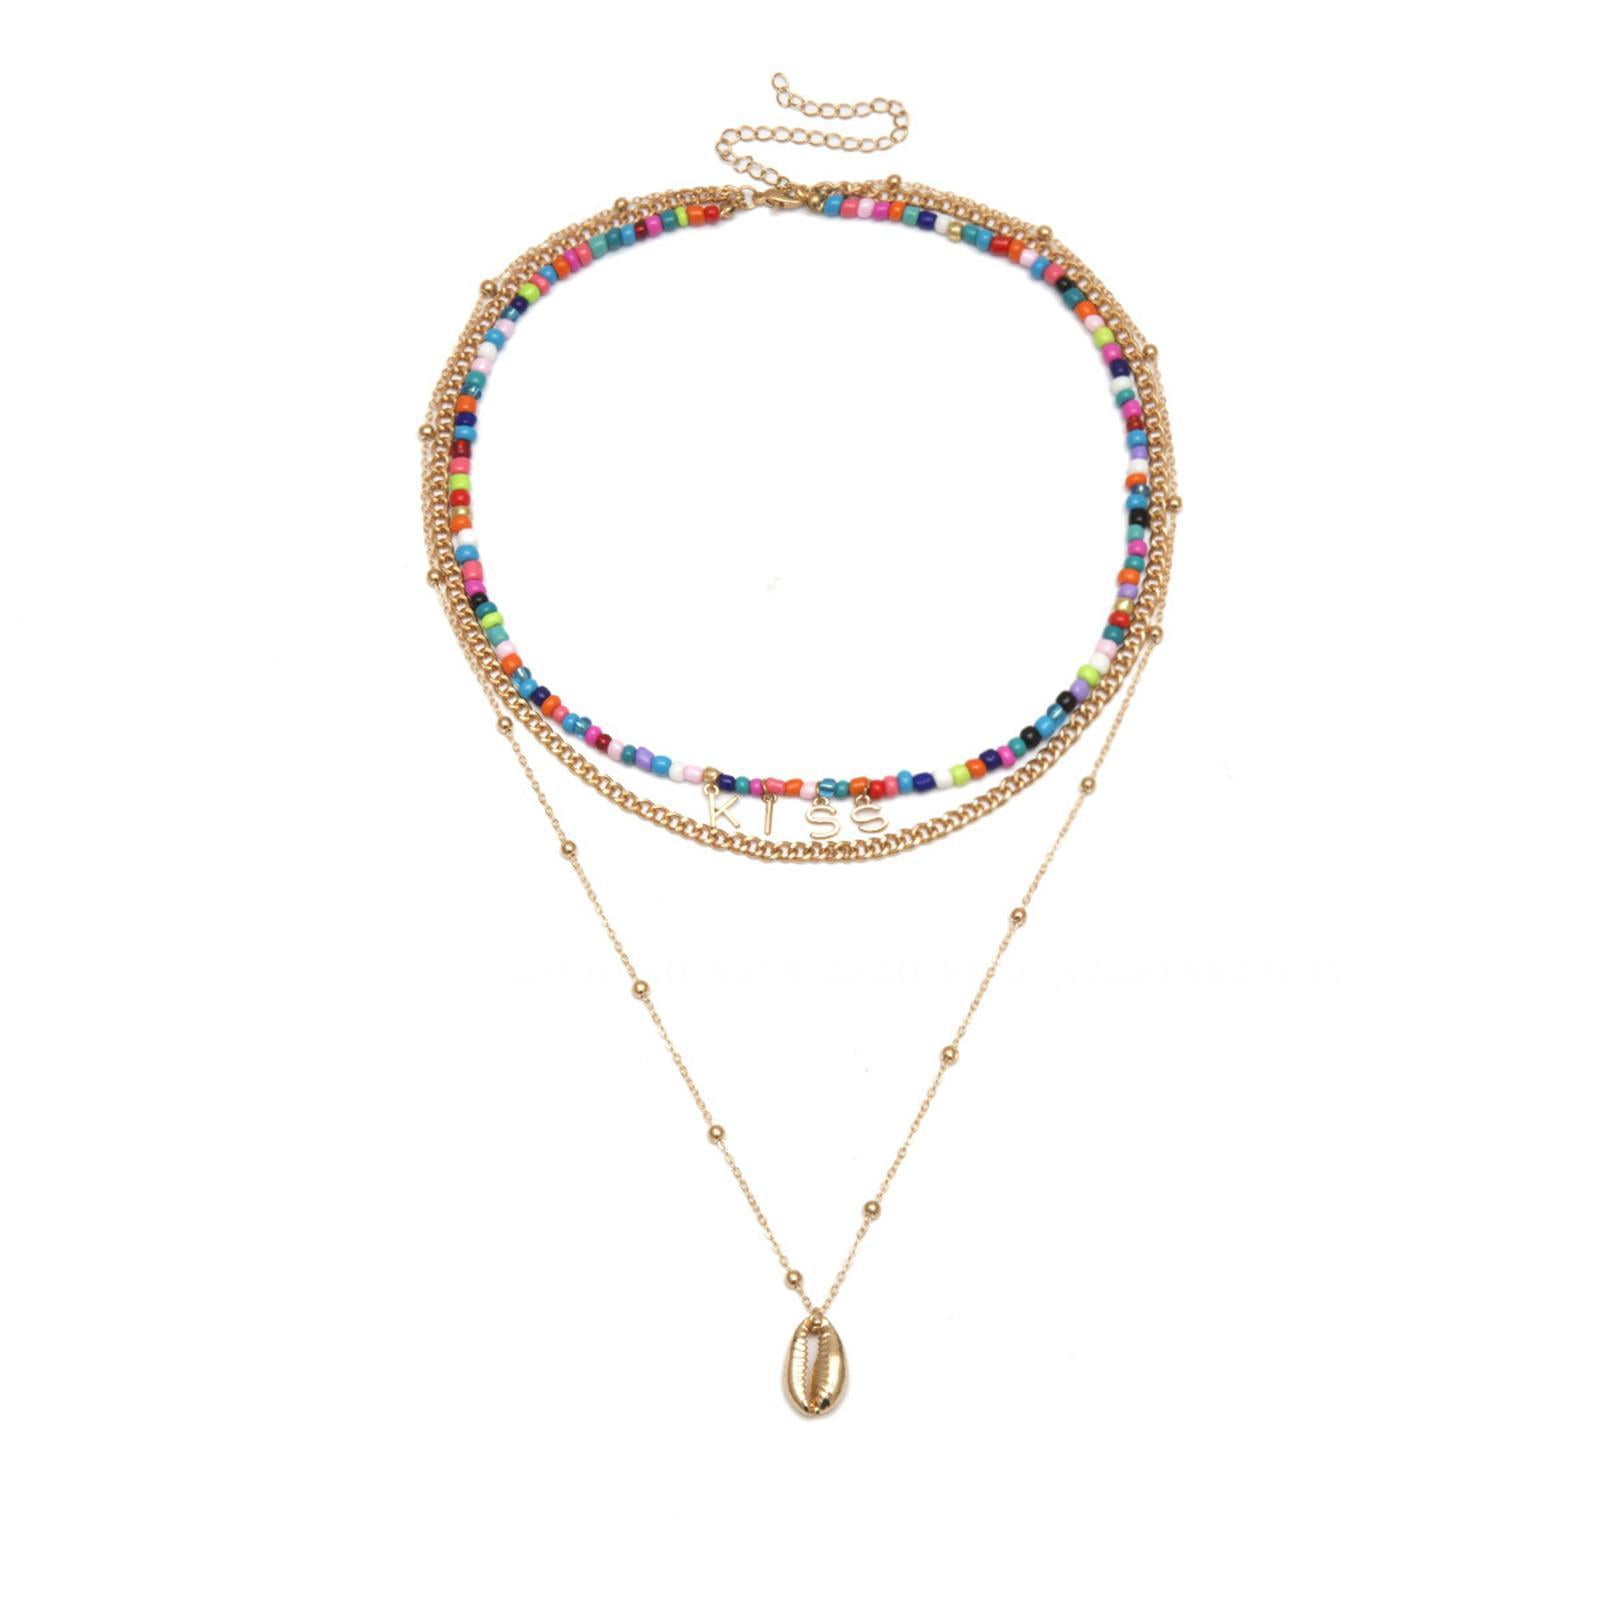 Buy Multilayer chain necklace with lock attached stylish fashion